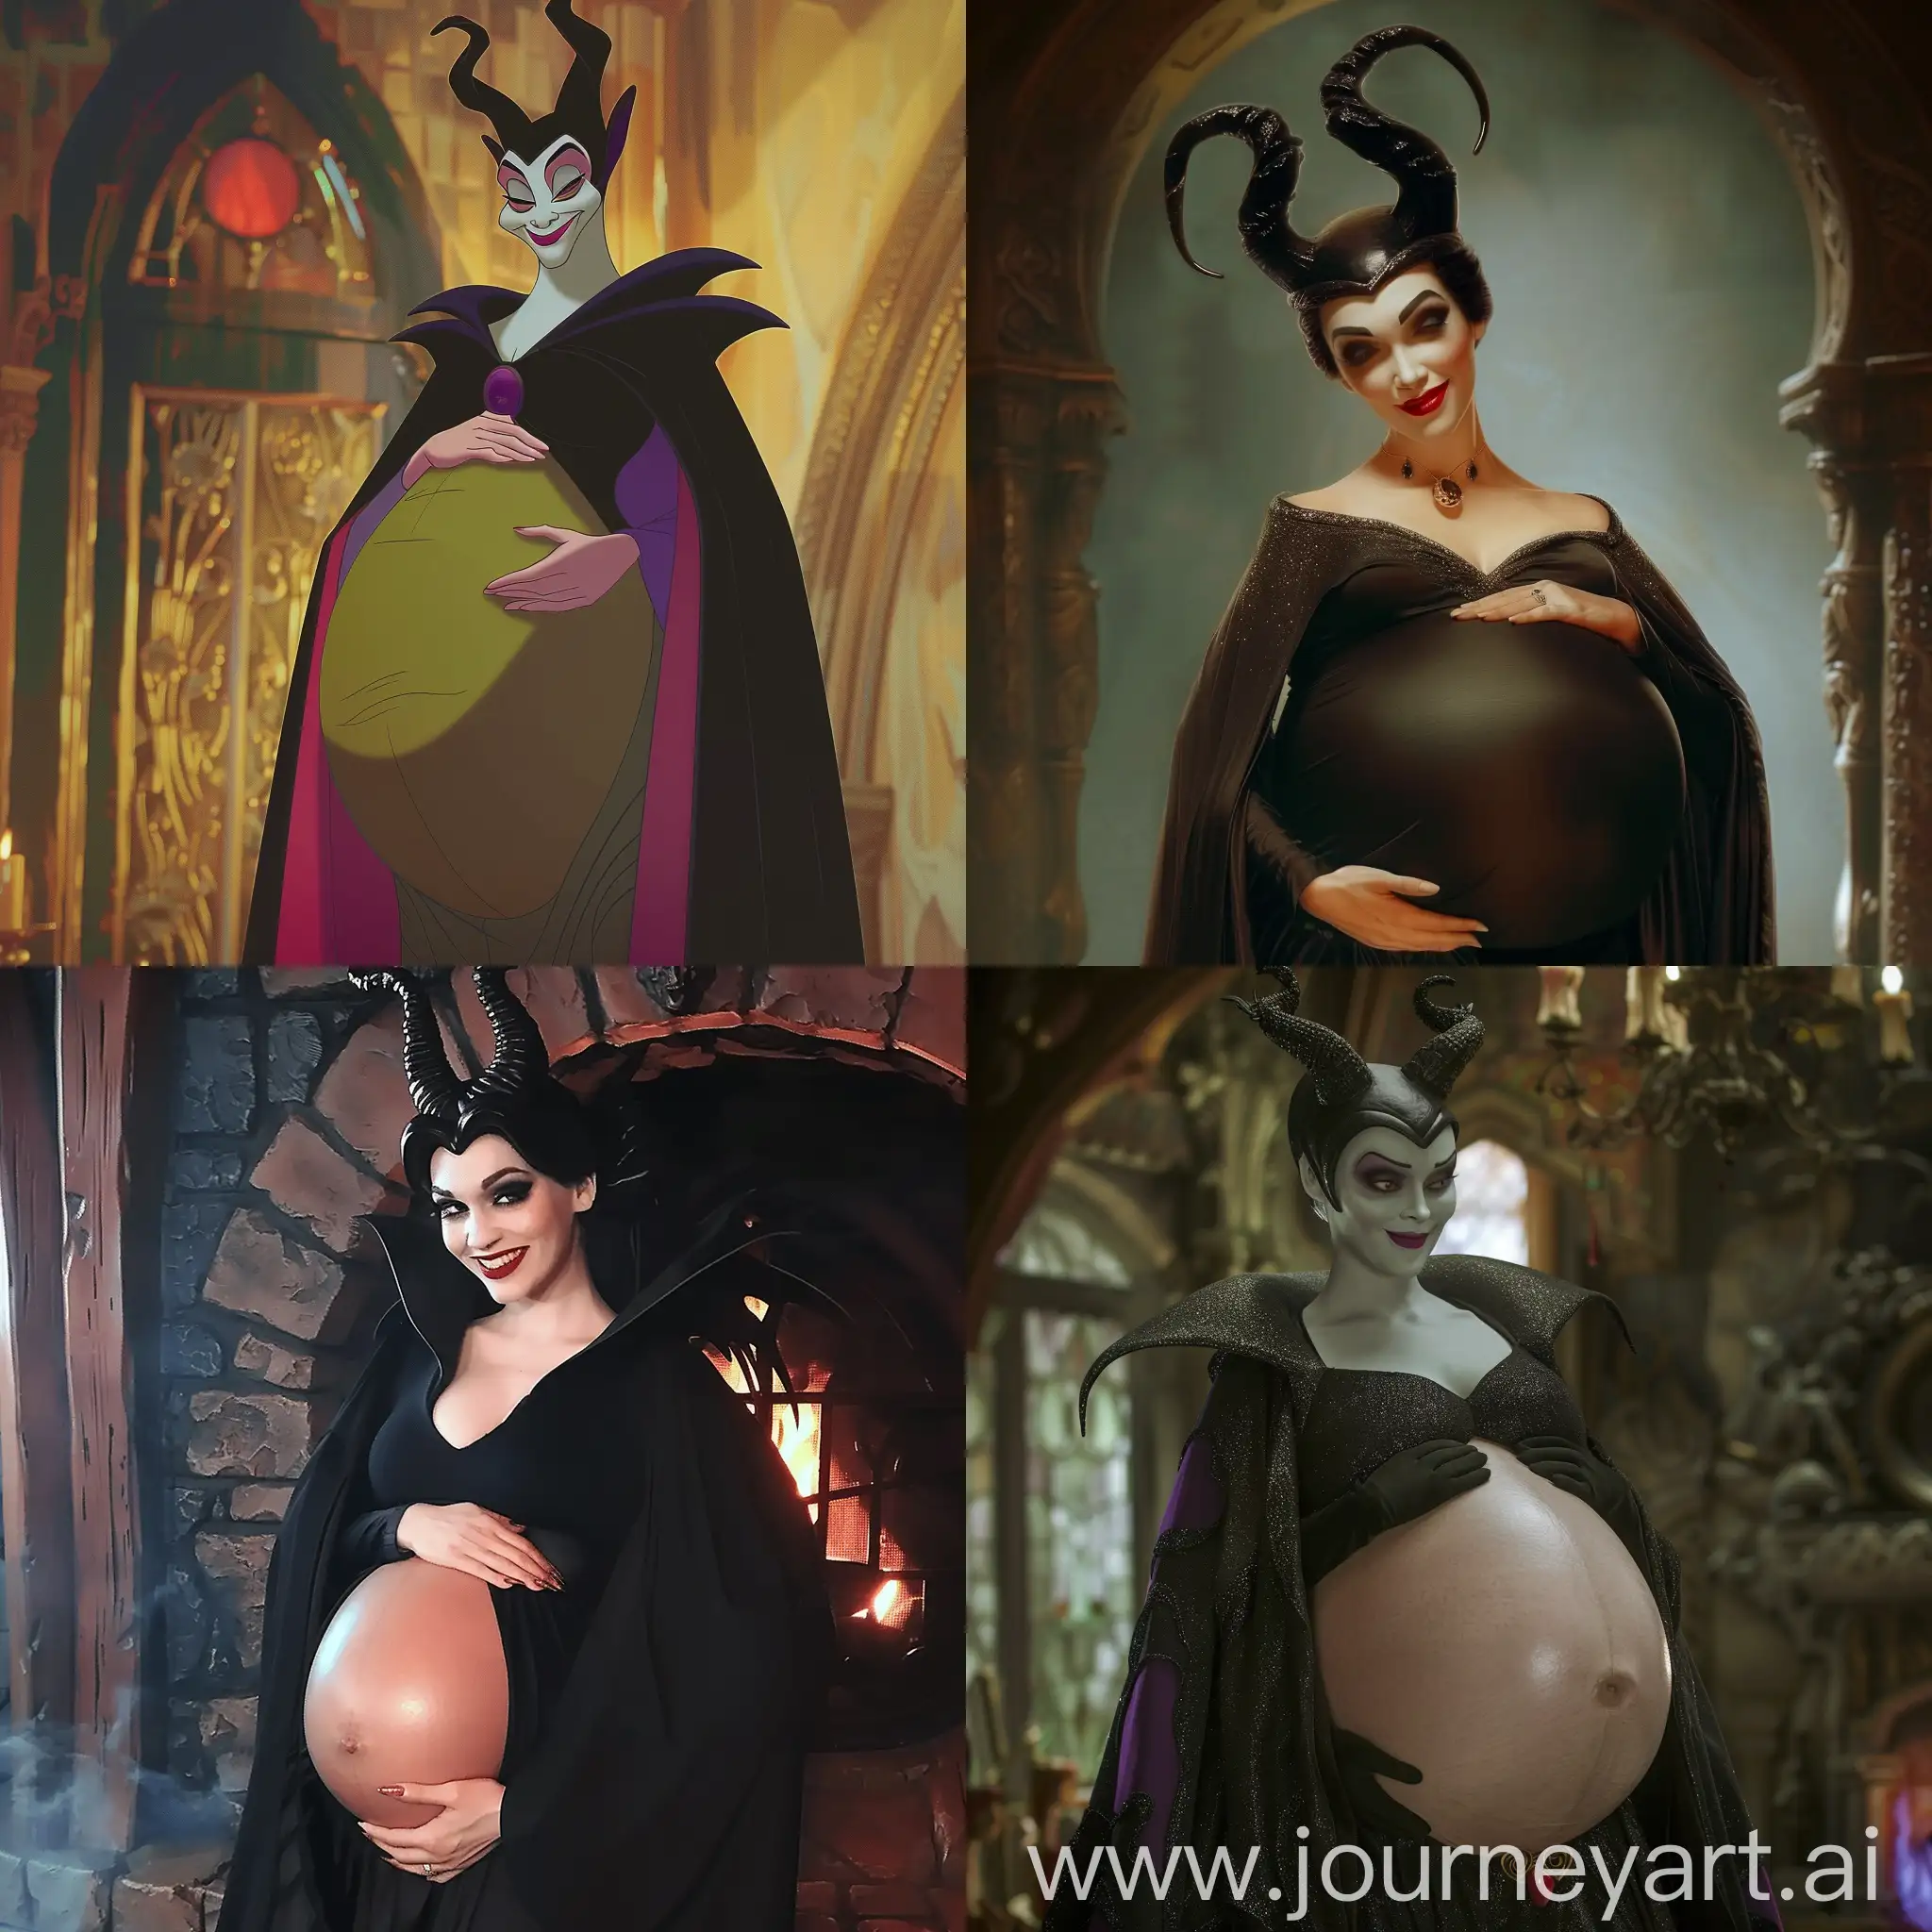 Pregnant-Maleficent-with-Exposed-Belly-in-Artistic-Portrait